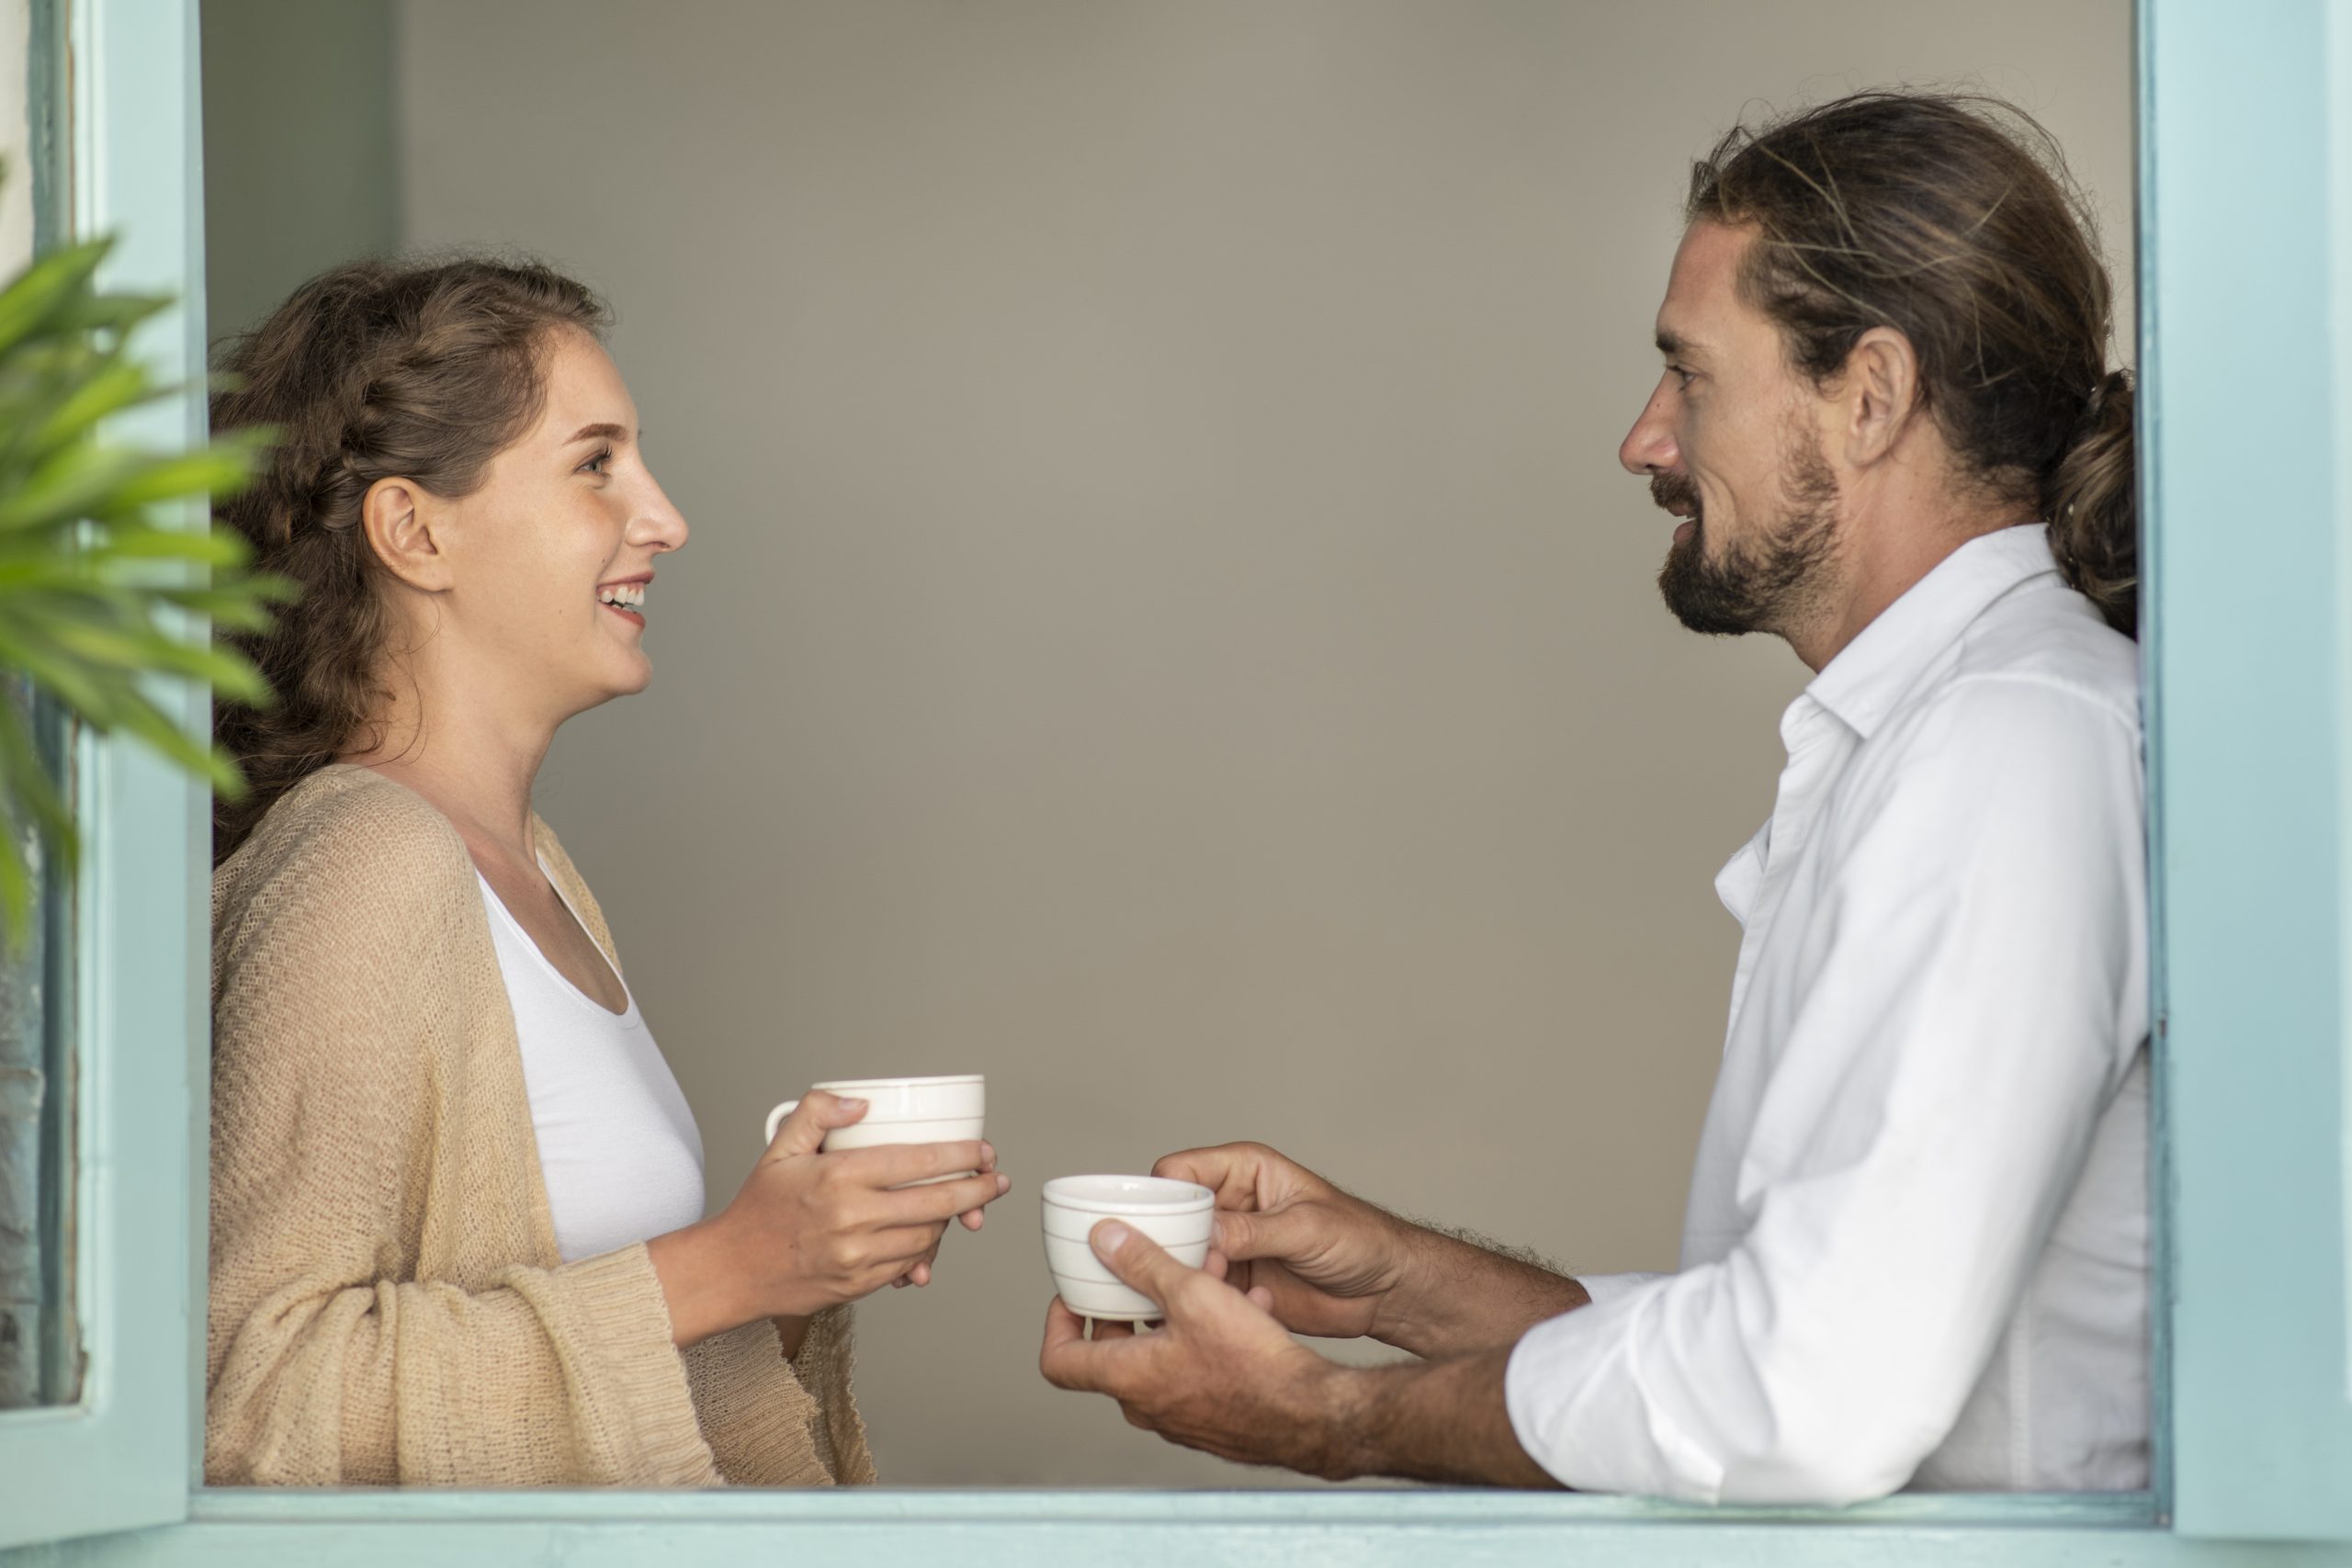 Couple drinking coffee and talking to each other to build a healthy relationship.